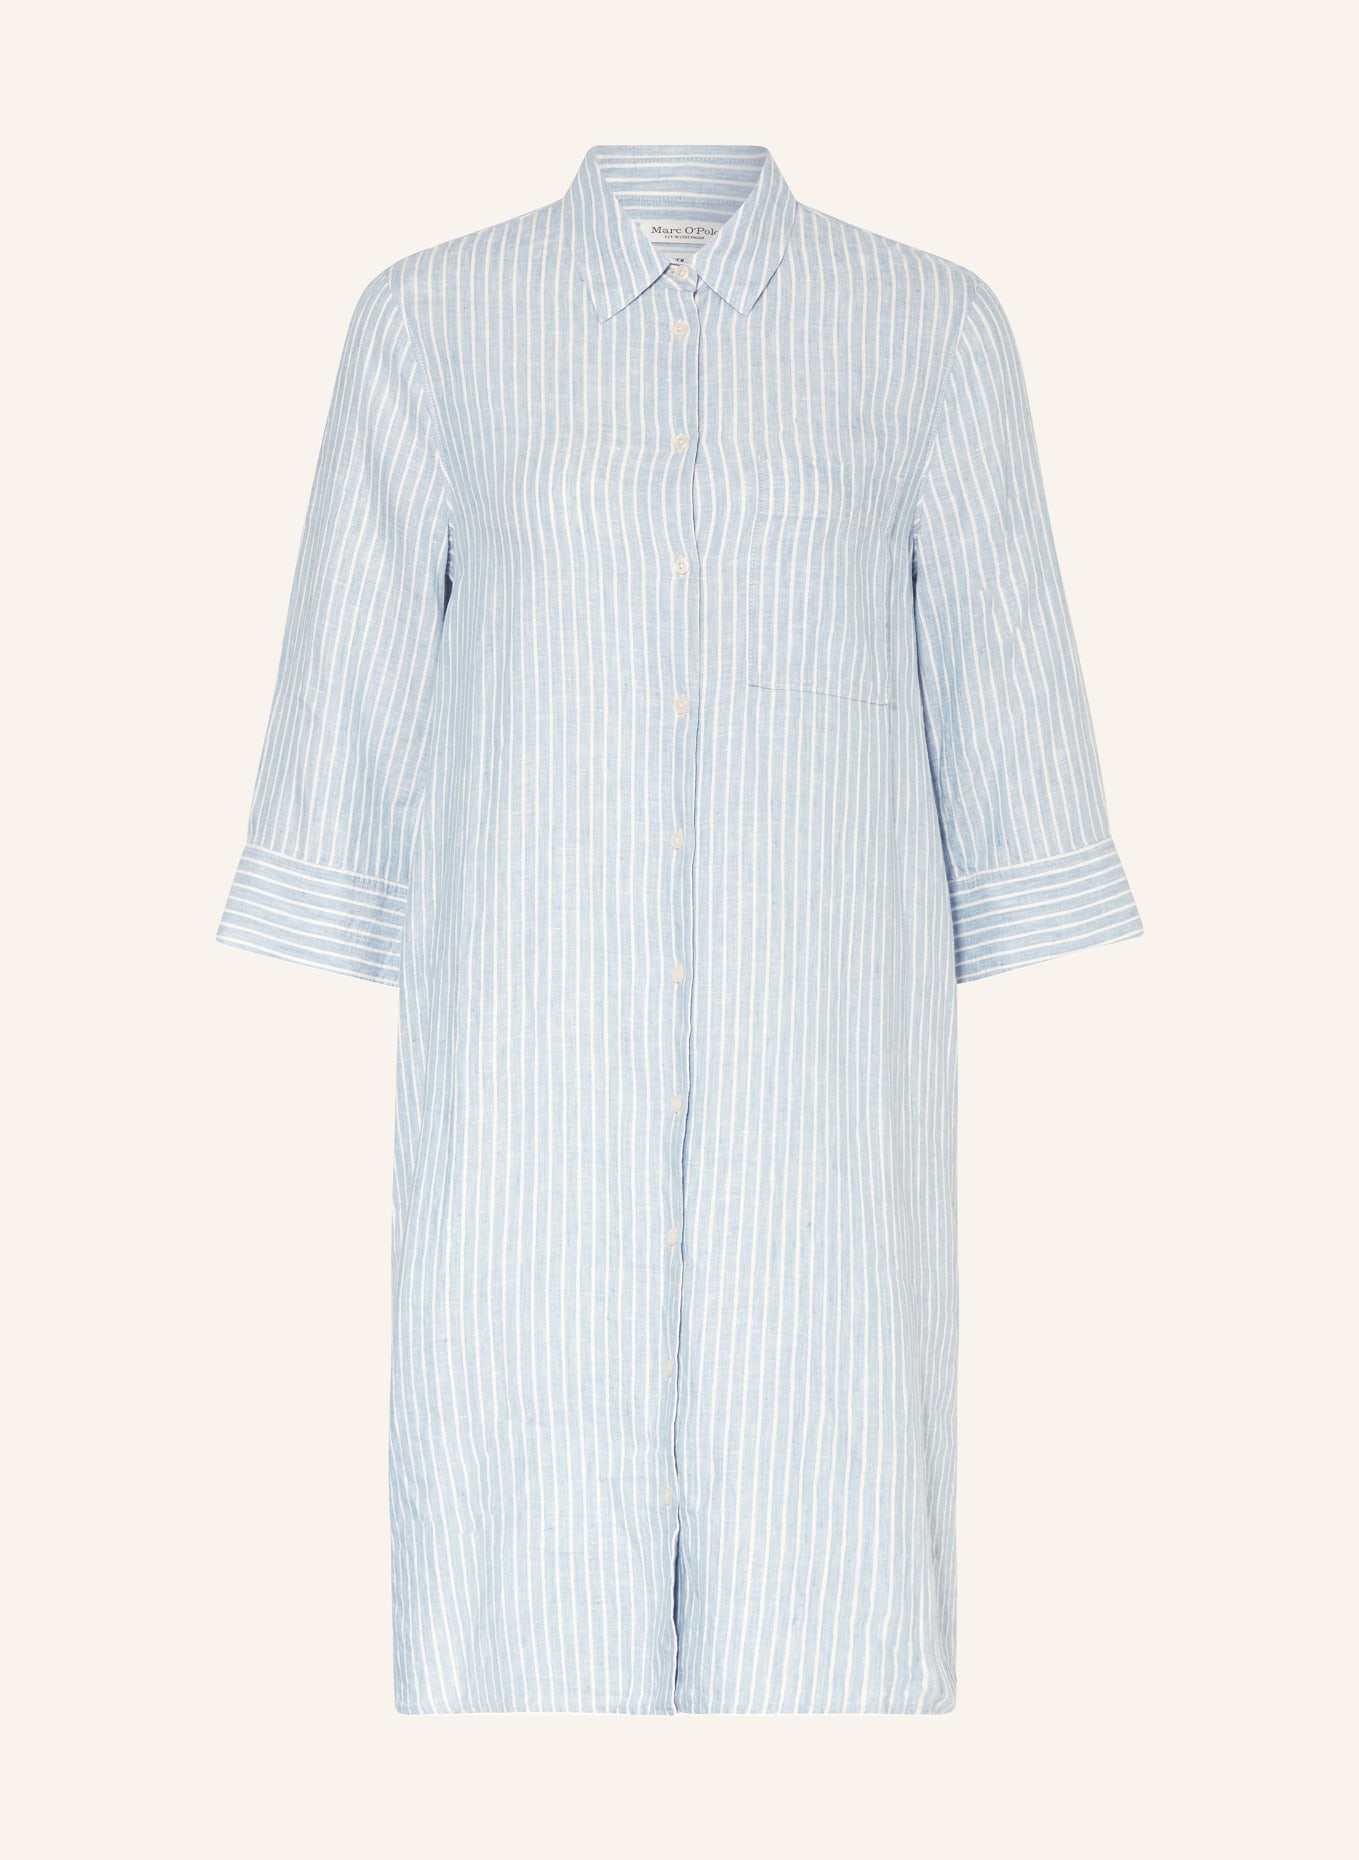 Marc O'Polo Shirt dress made of linen with 3/4 sleeves, Color: LIGHT BLUE/ WHITE (Image 1)